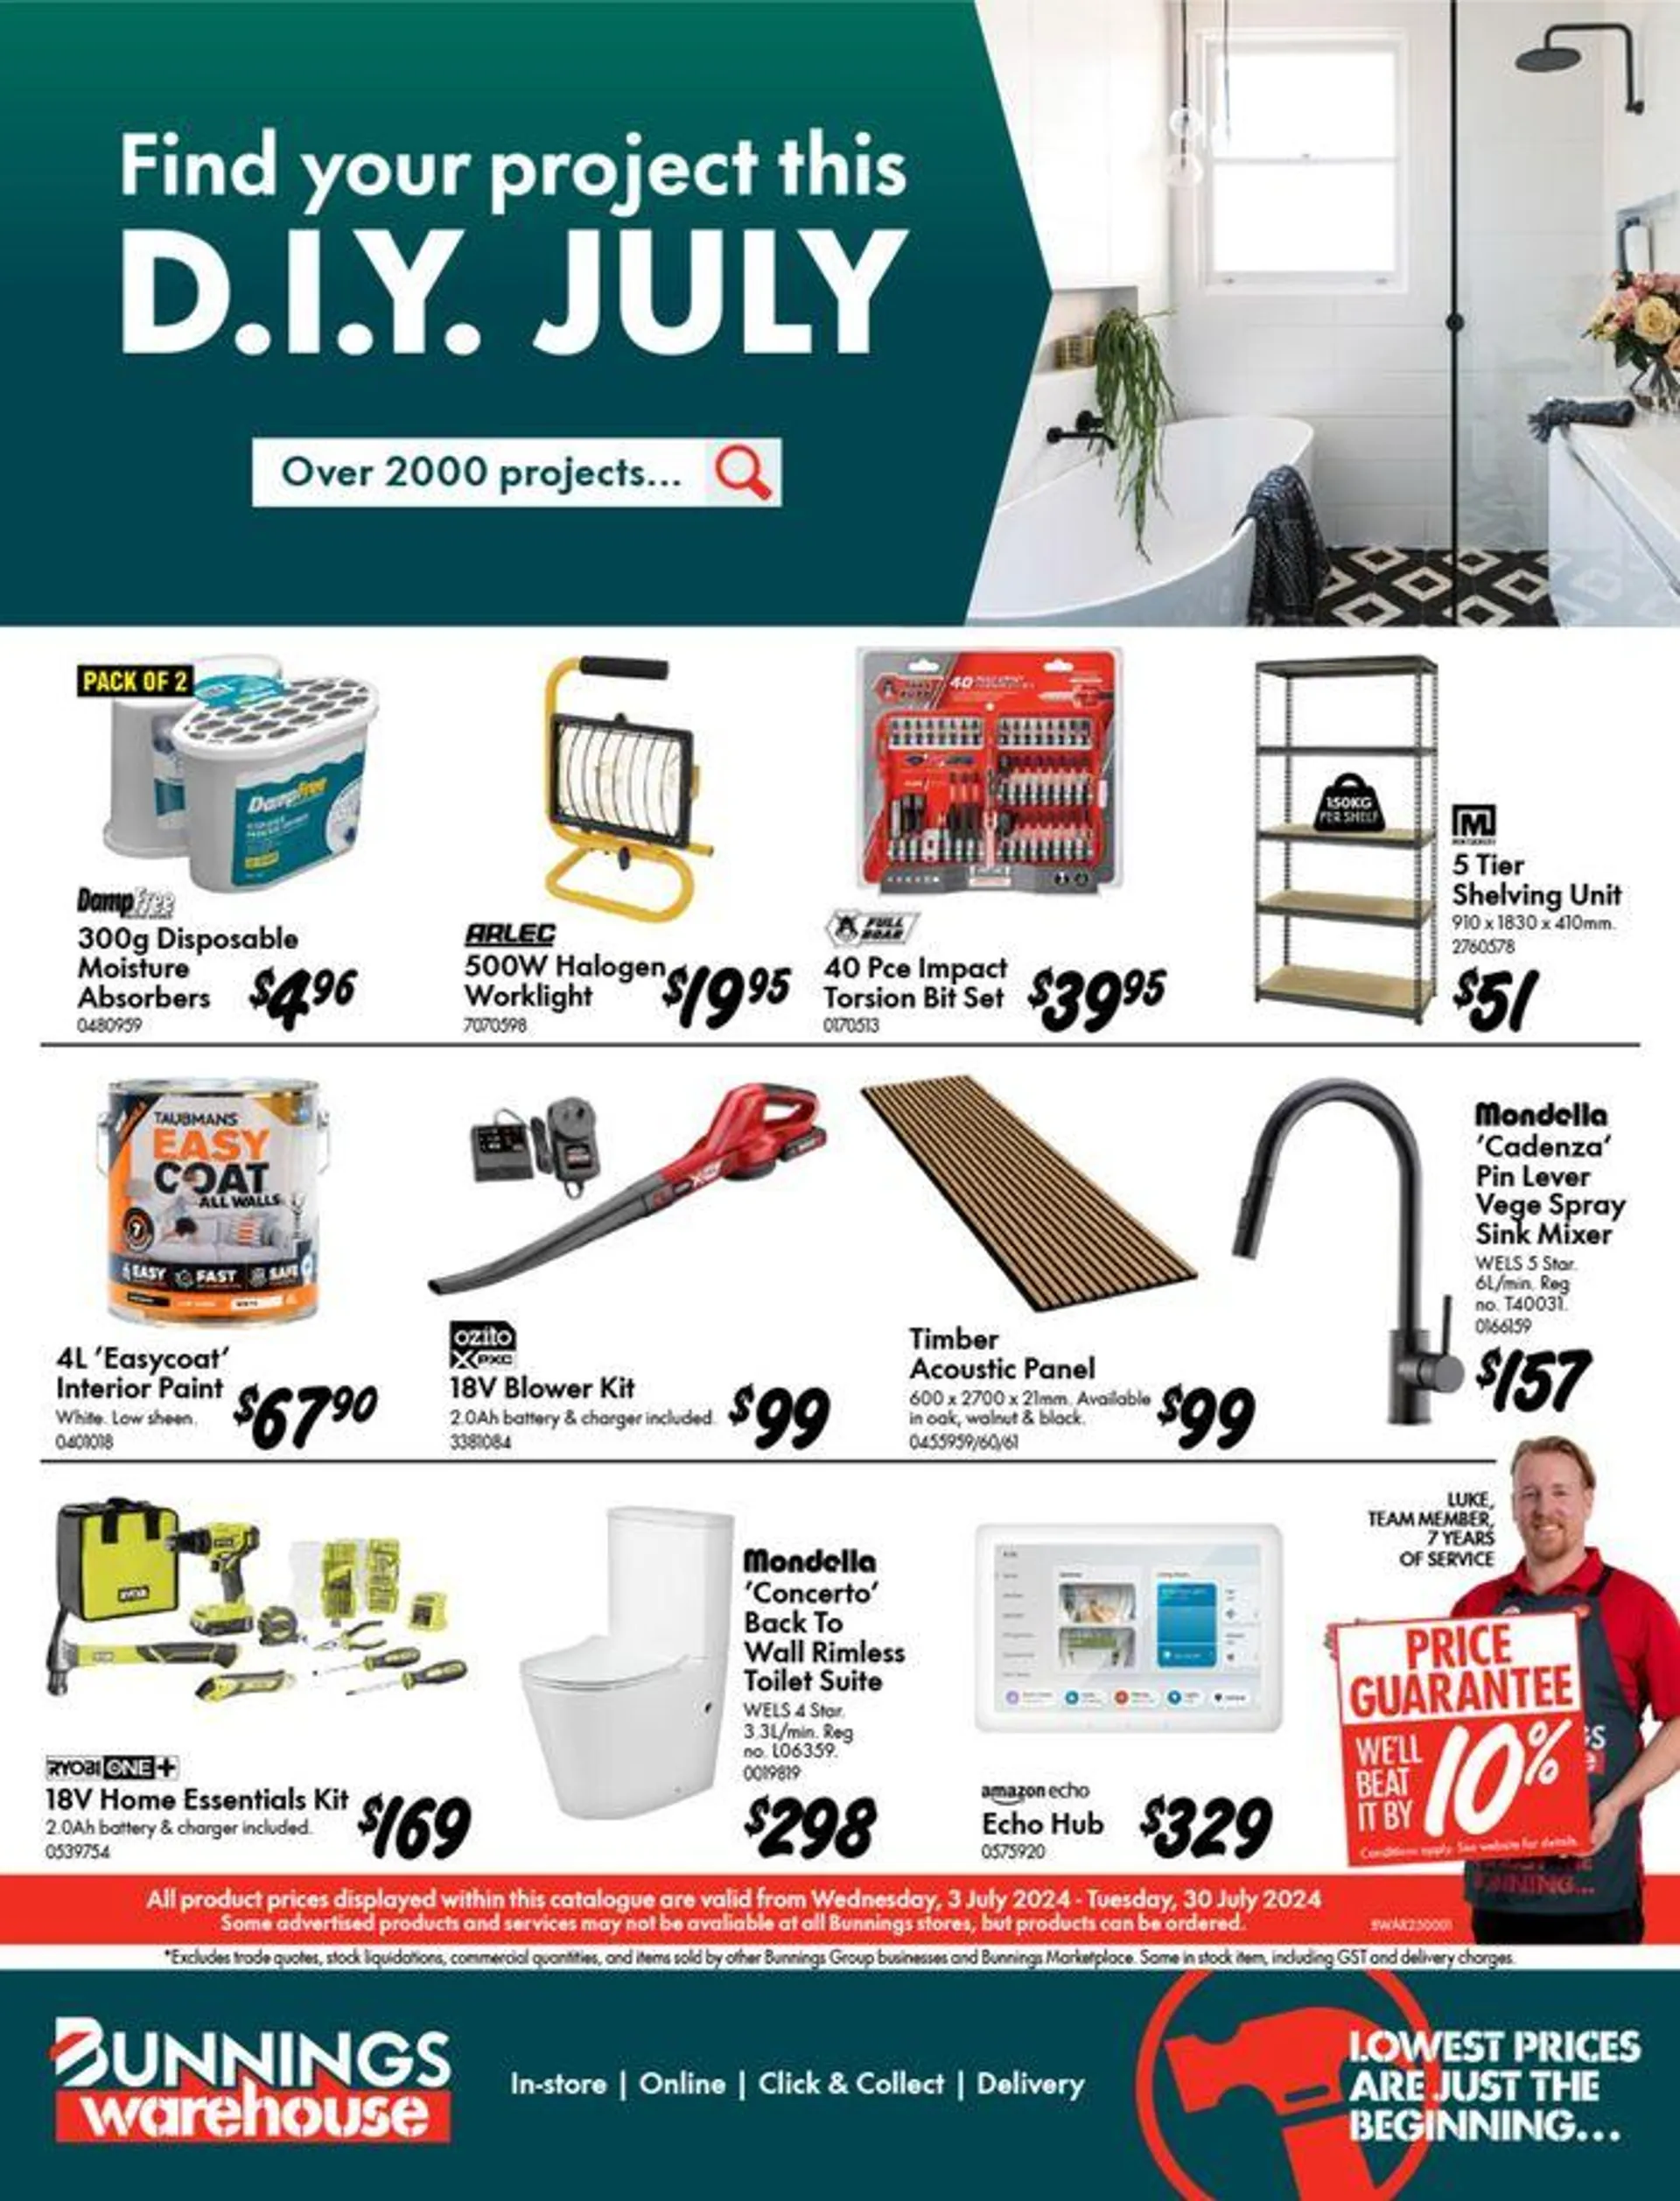 Find Your Project This D.I.Y. July - 1